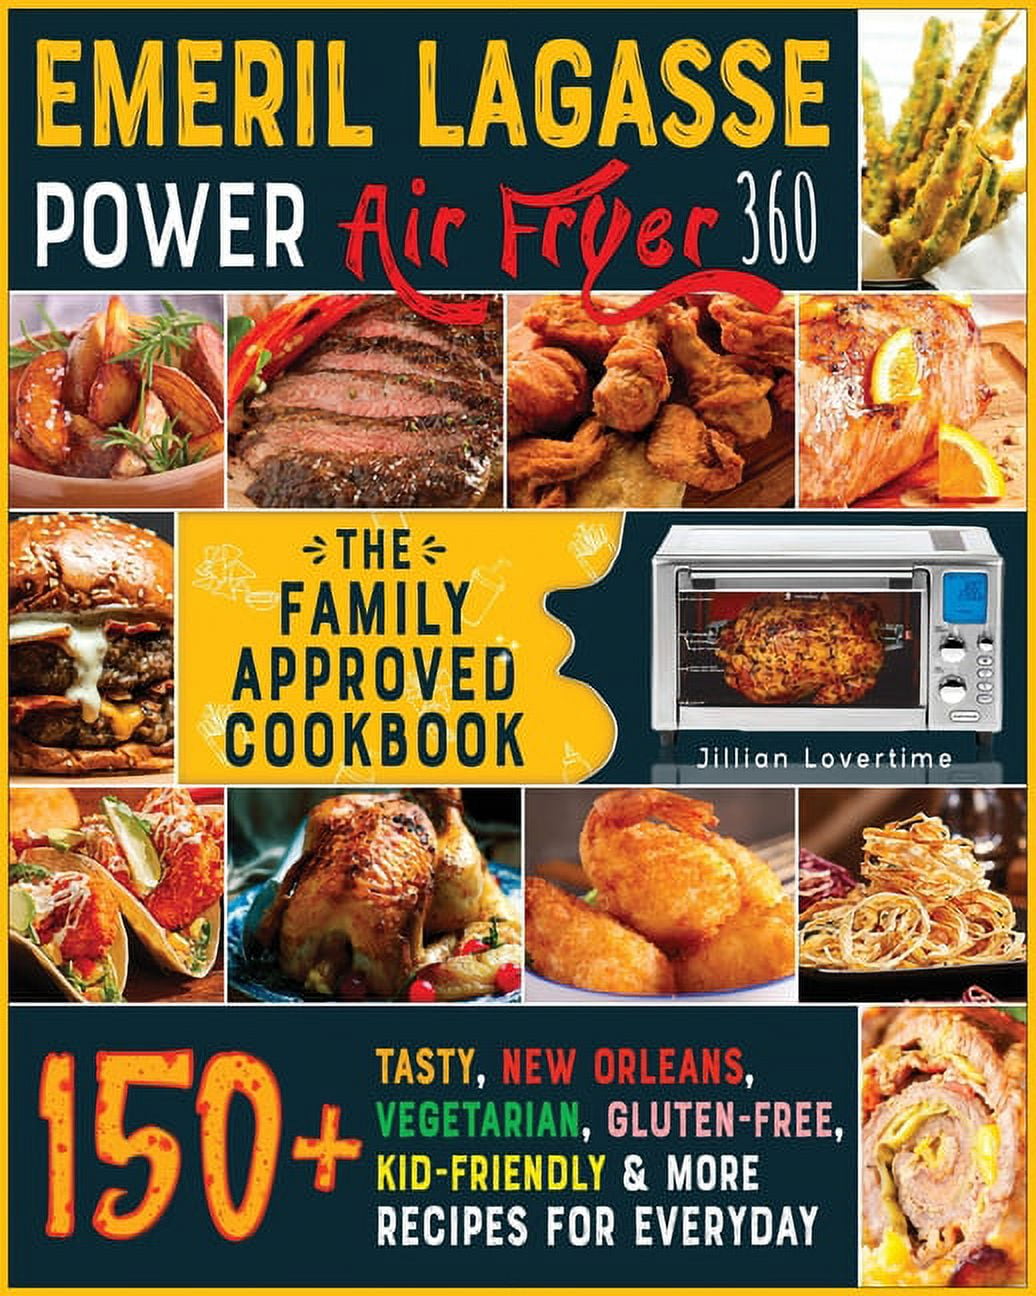 Emeril Lagasse Power Air Fryer 360 Cookbook: Newest, Creative & Savory  Recipes to Jump-Start Your Day (Hardcover)